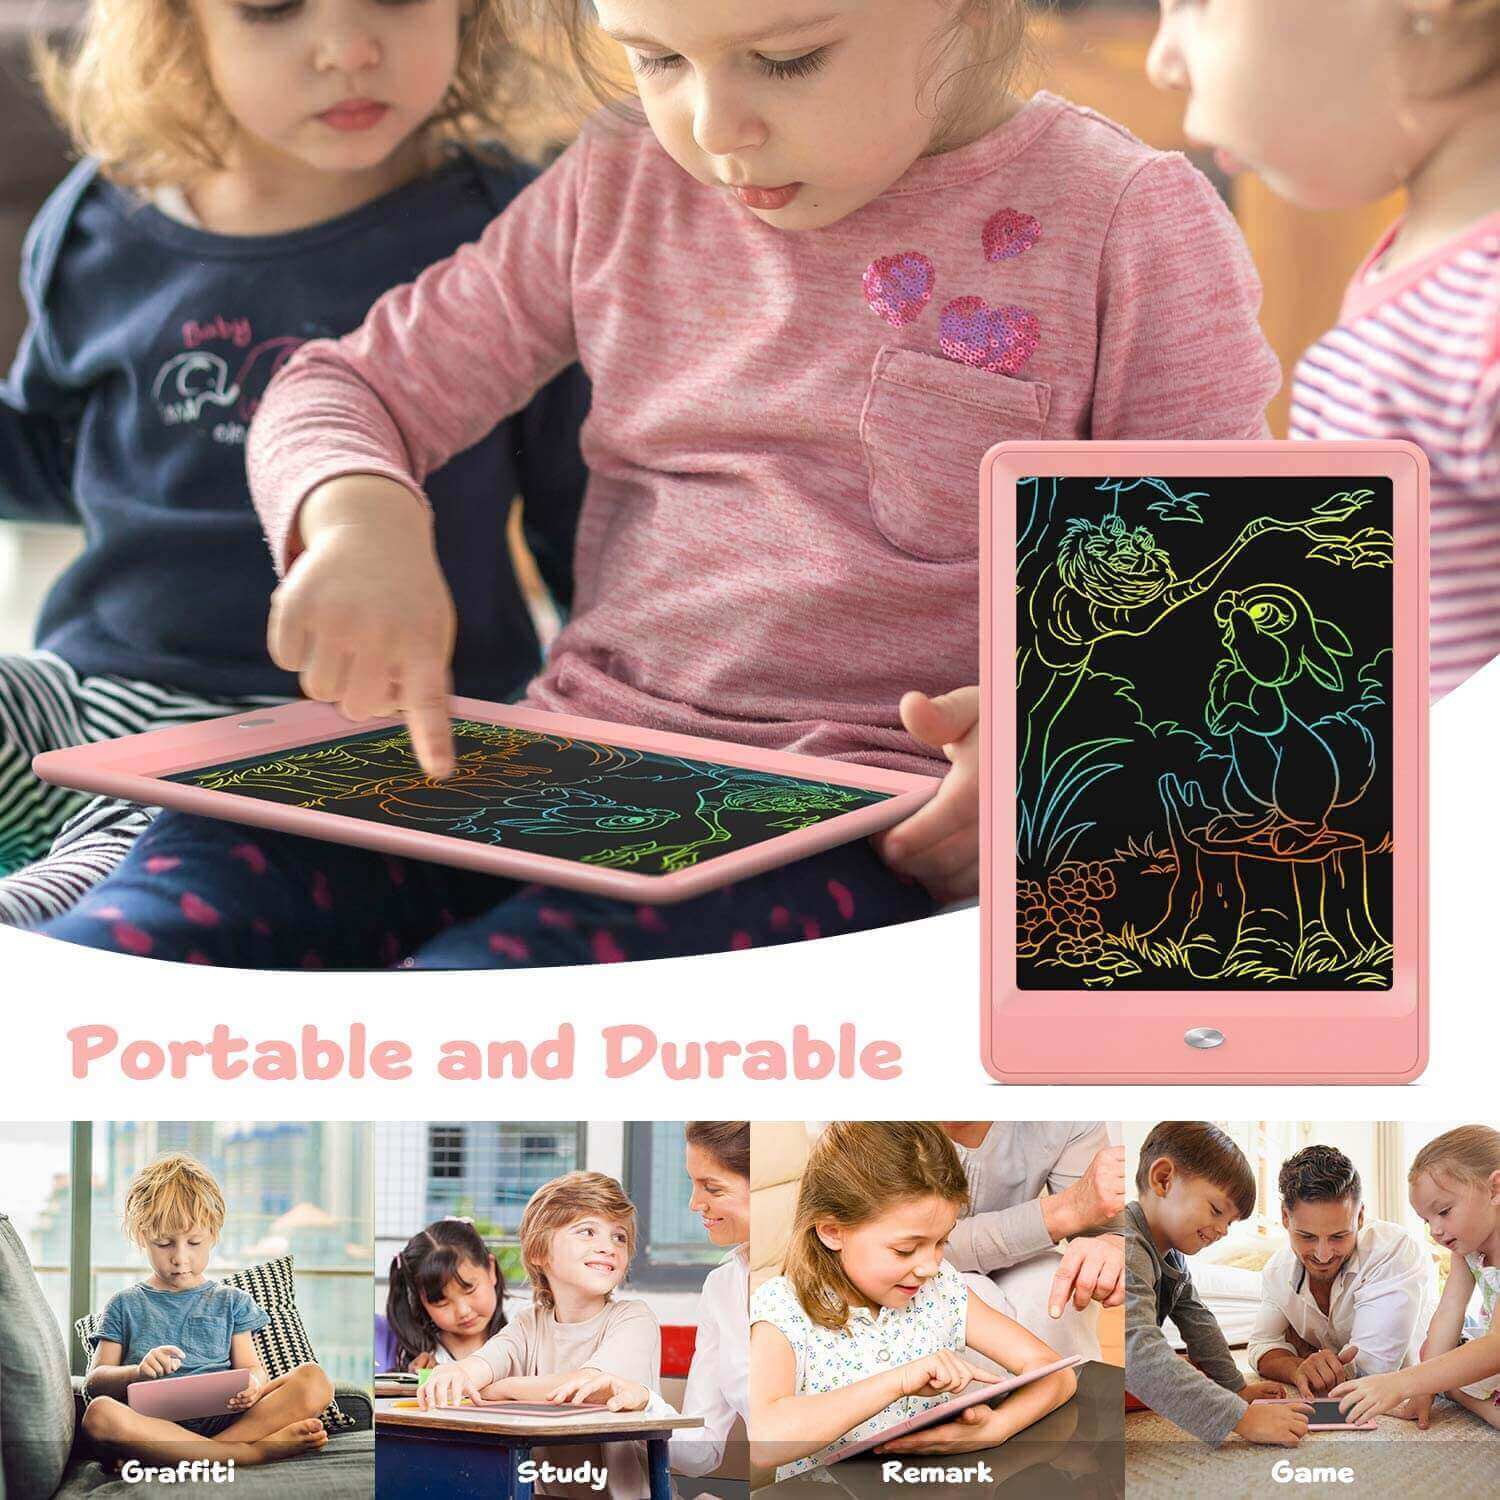 10 Inch Duck Erasable LCD Writing Tablet Doodle Board - Bravokidstoys